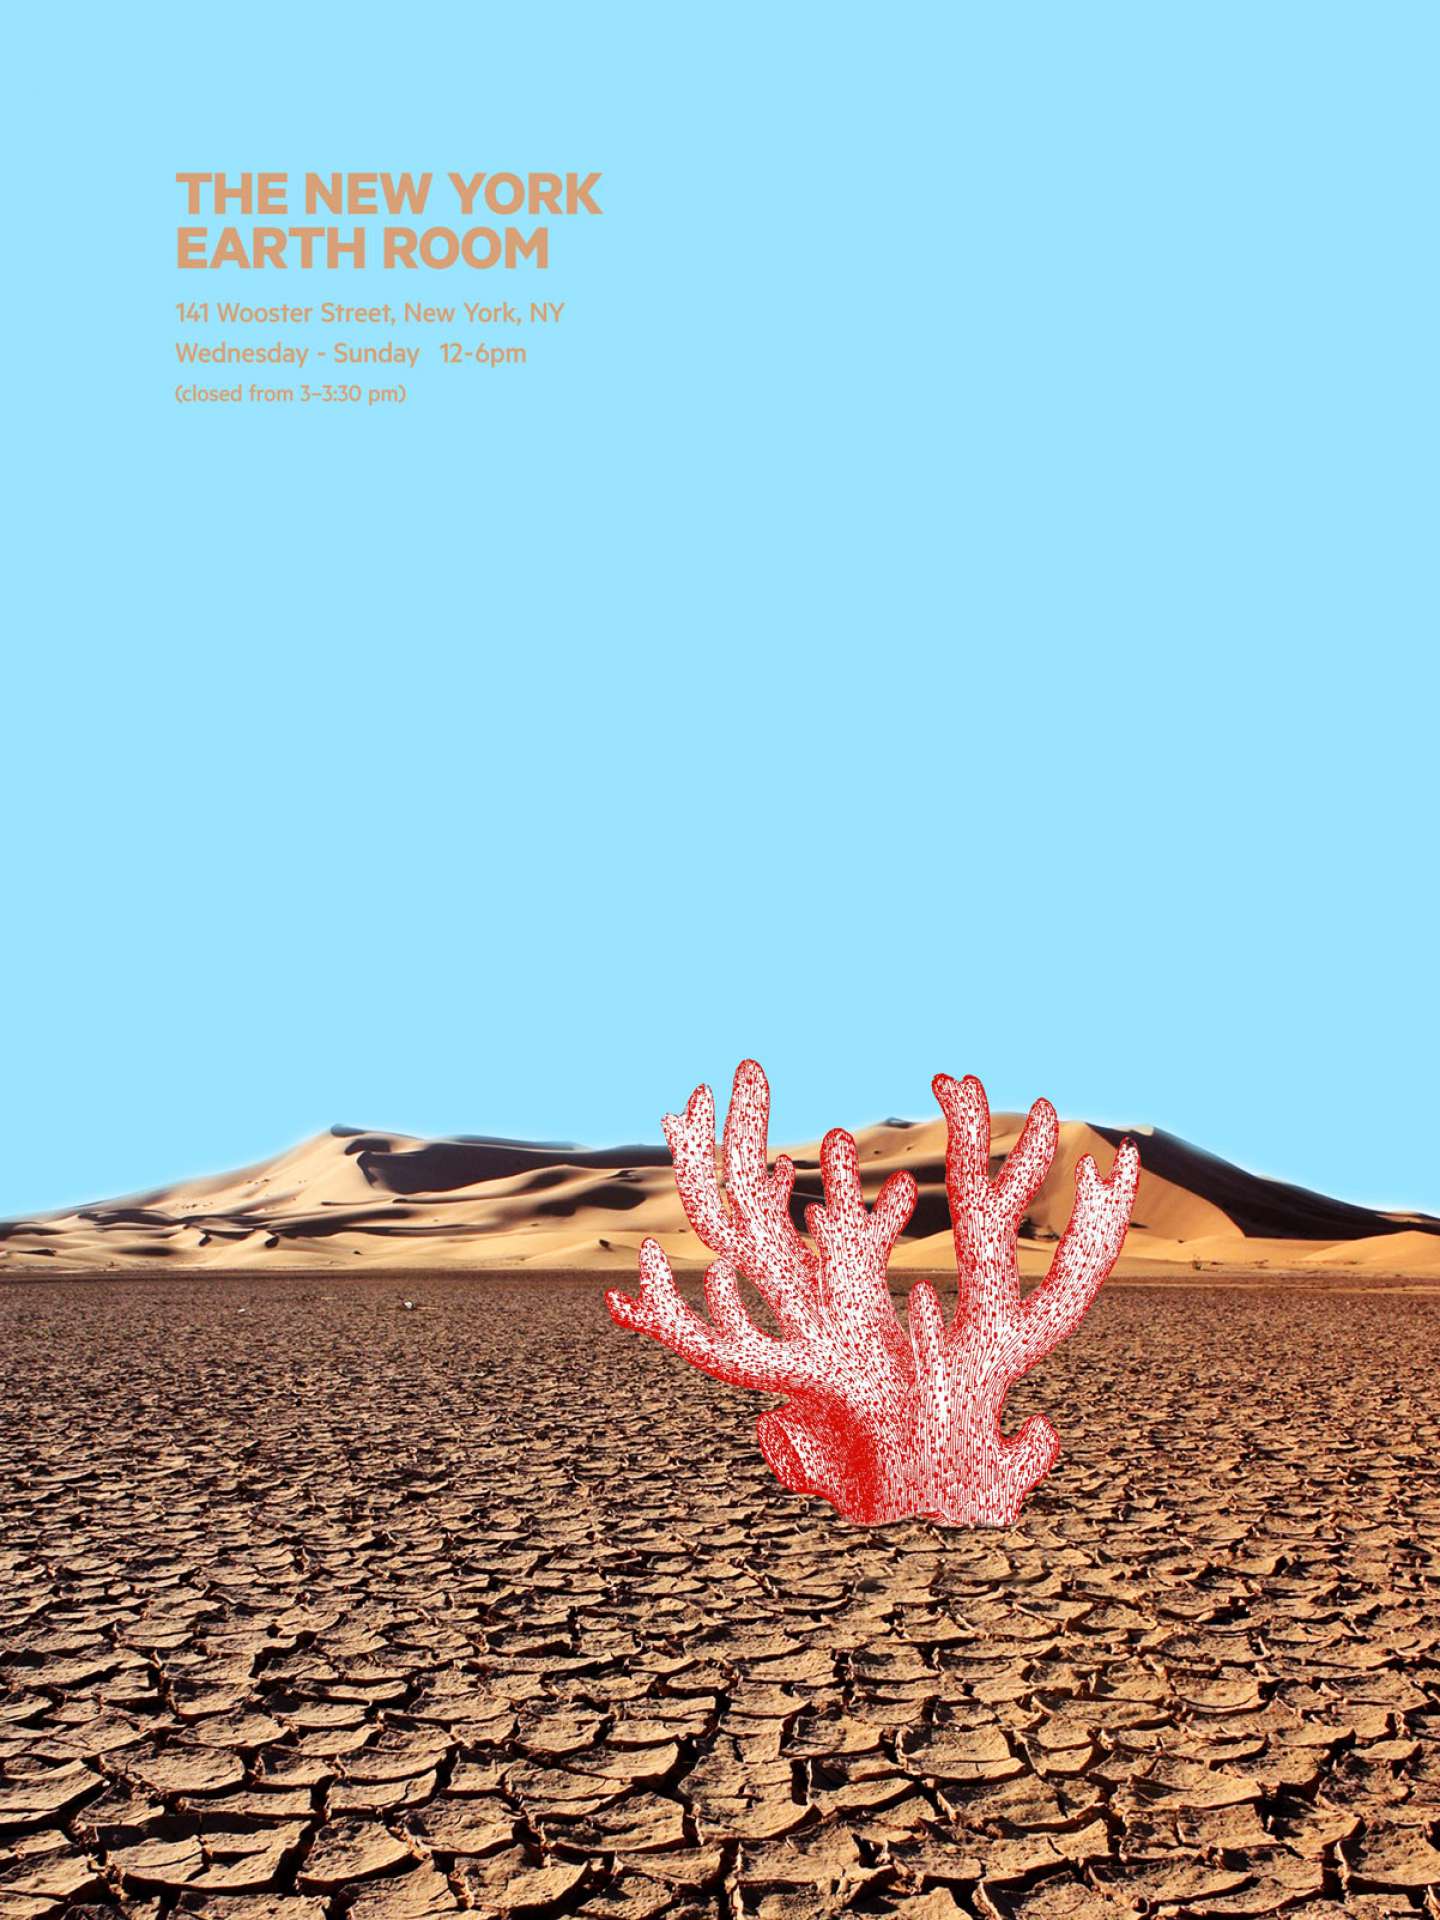 New York Earth Room Poster